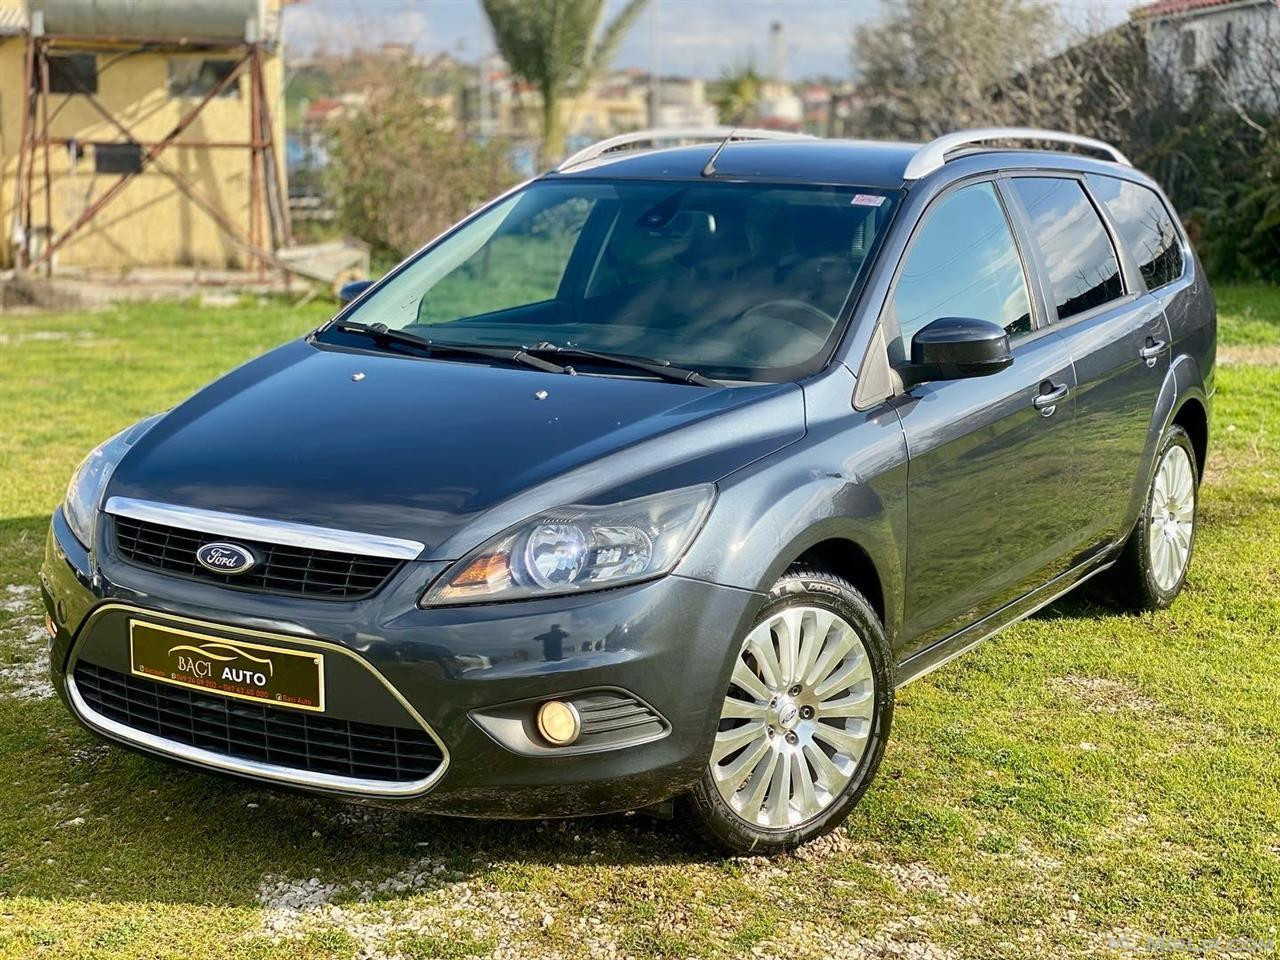 Ford Focus 1.6 Nafte sw manuale 